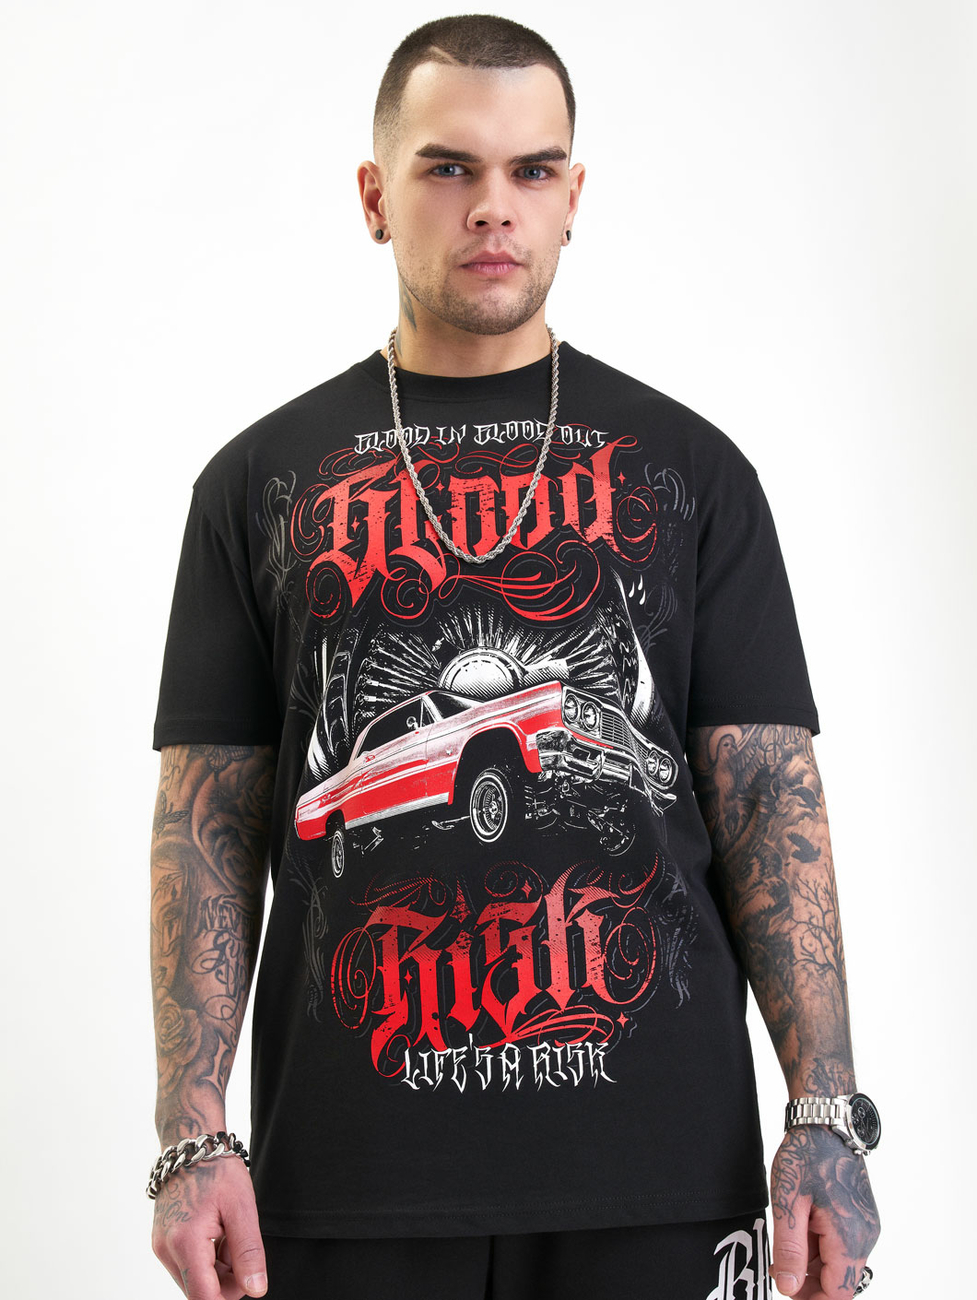 Blood In Blood Out Tavos T-Shirt 3XL